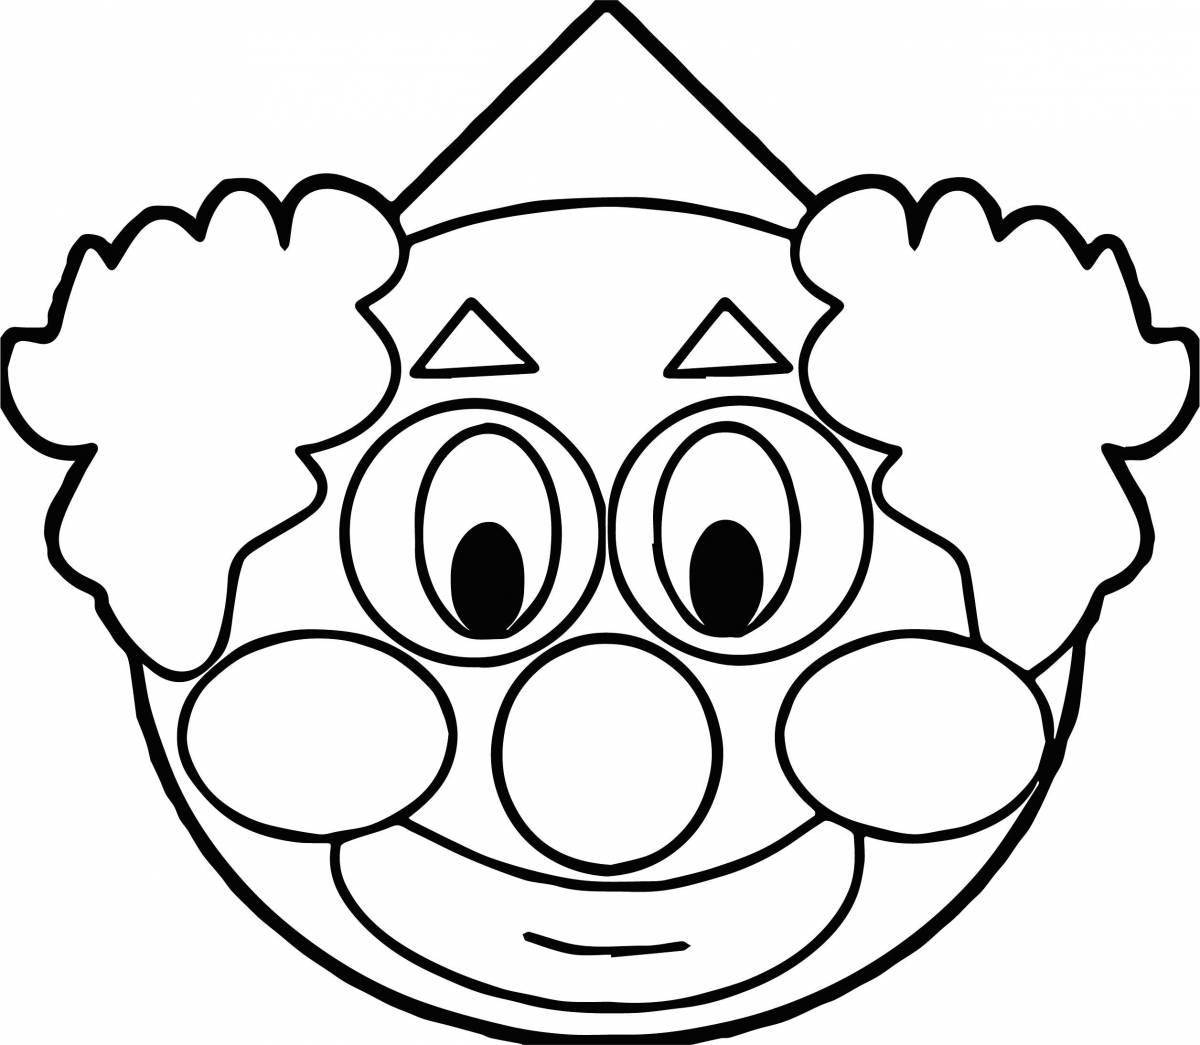 Exquisite clown face coloring page for kids